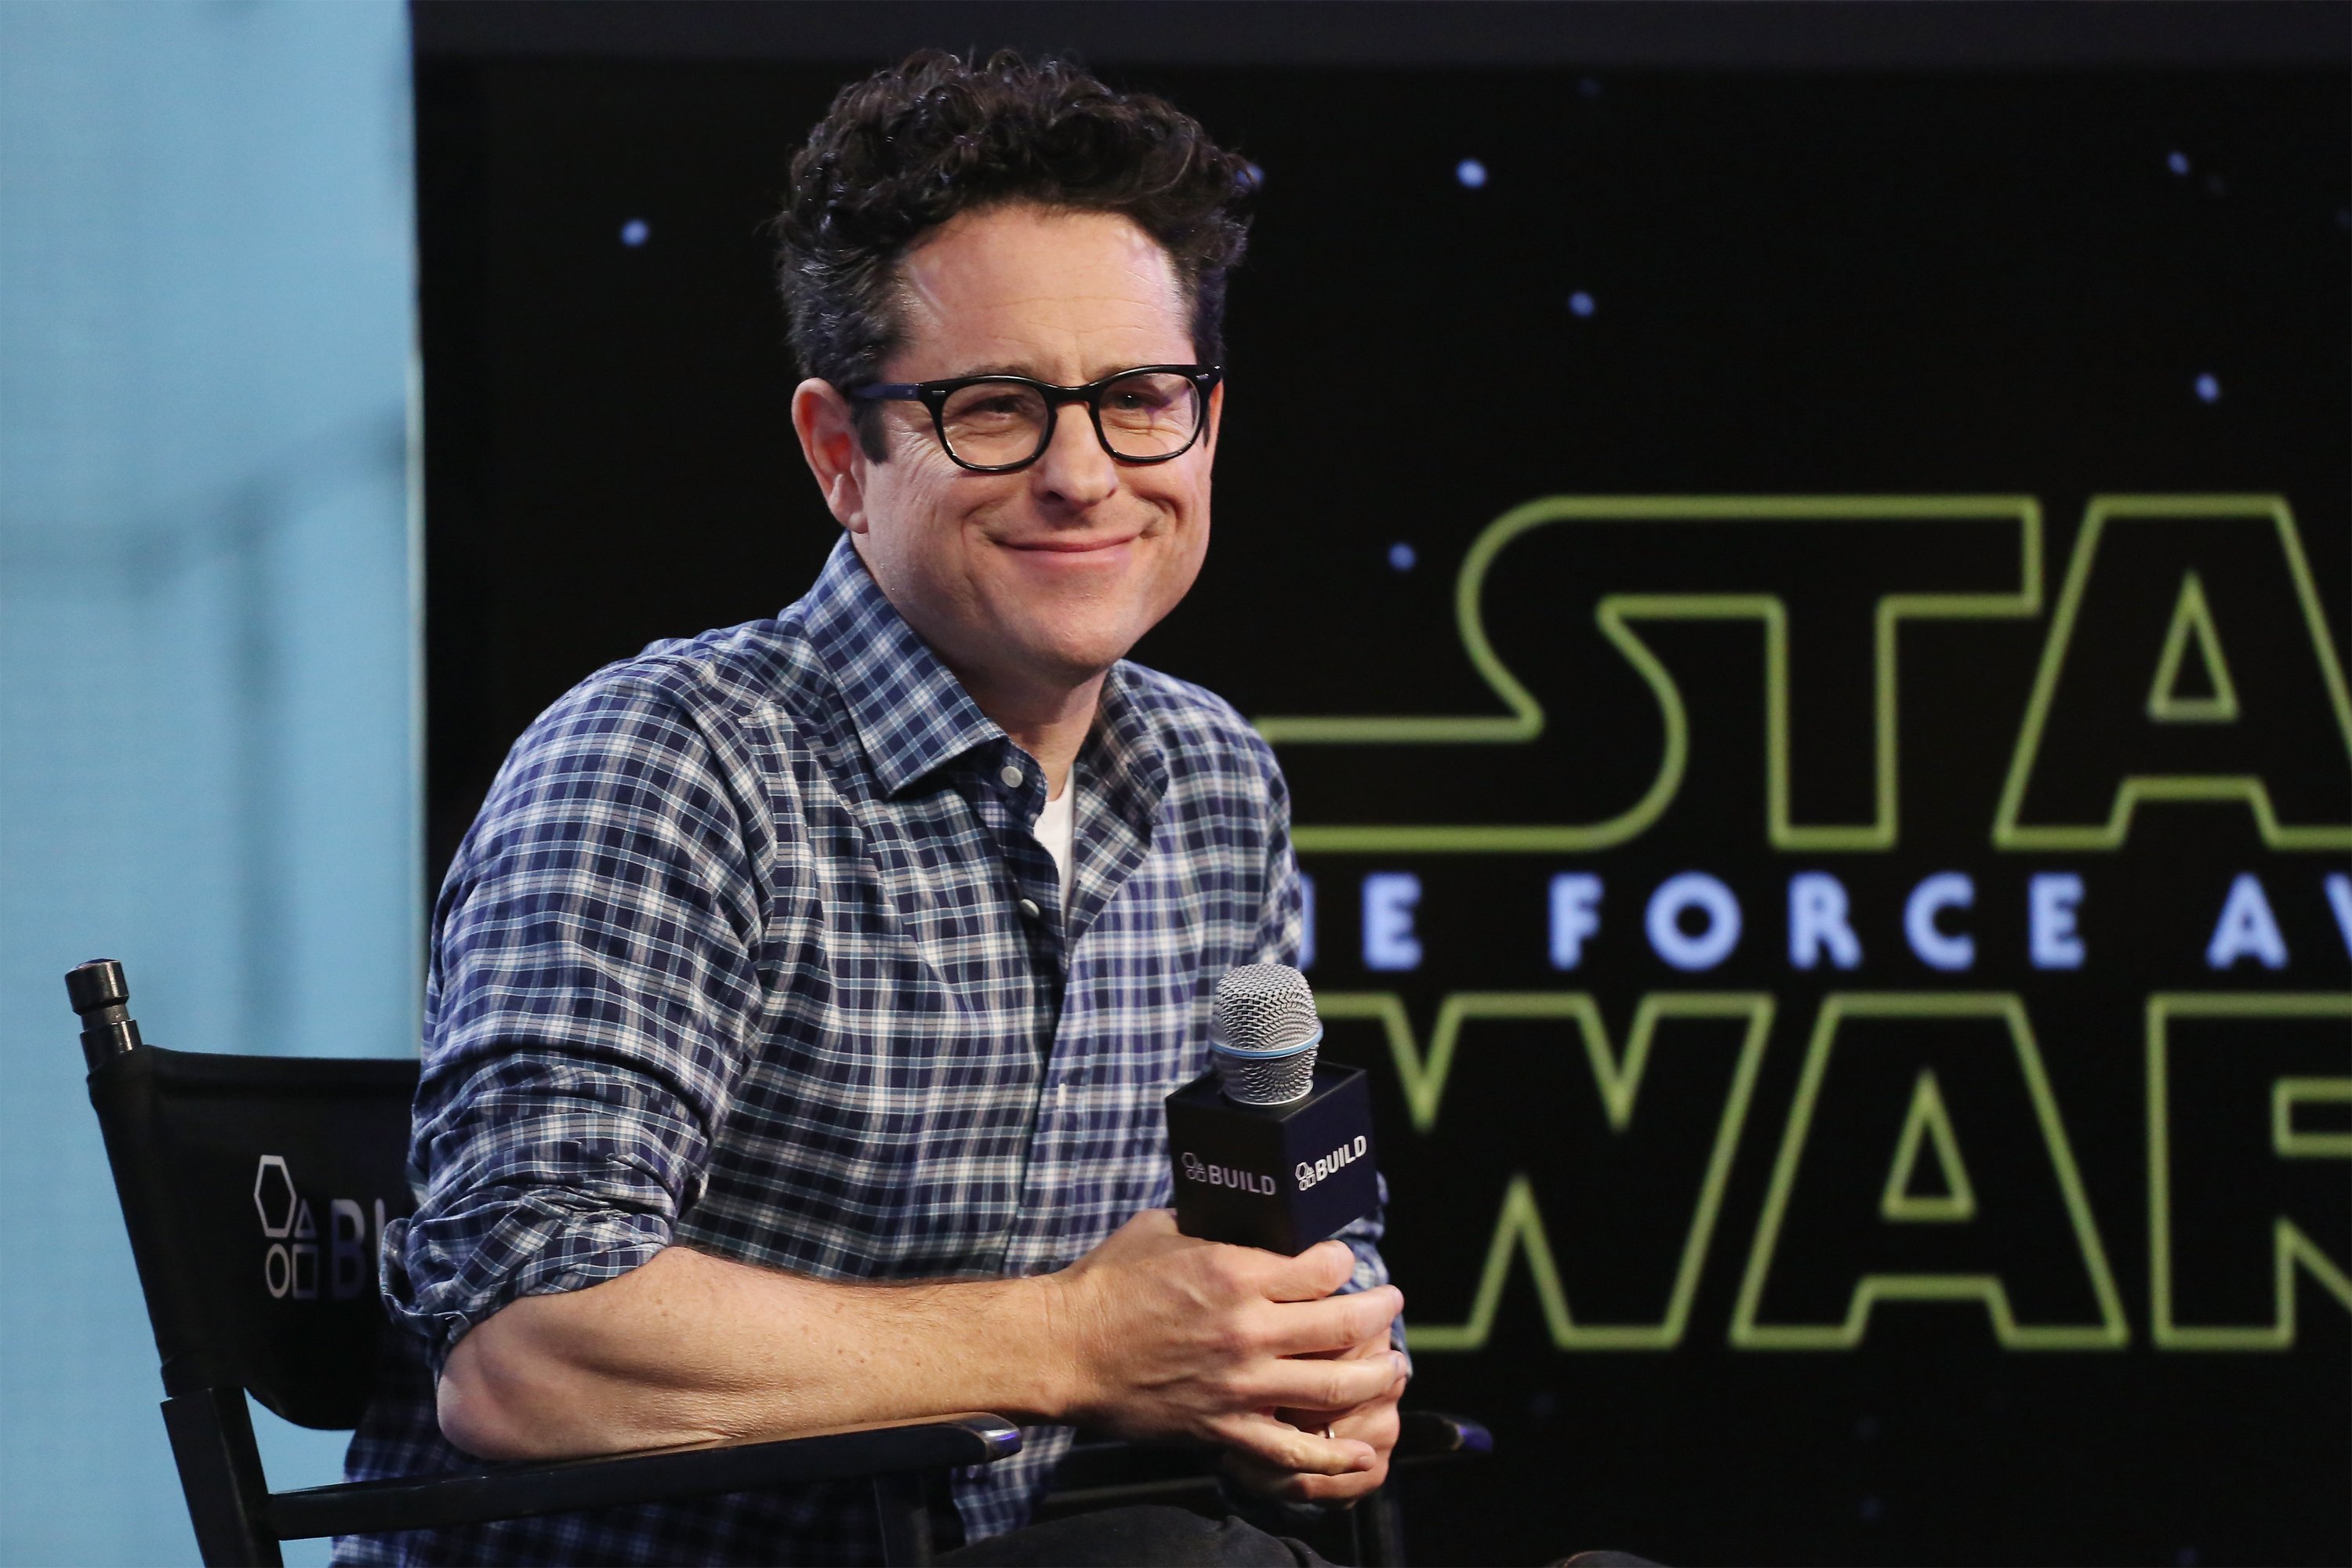 J. J. Abrams with a microphone